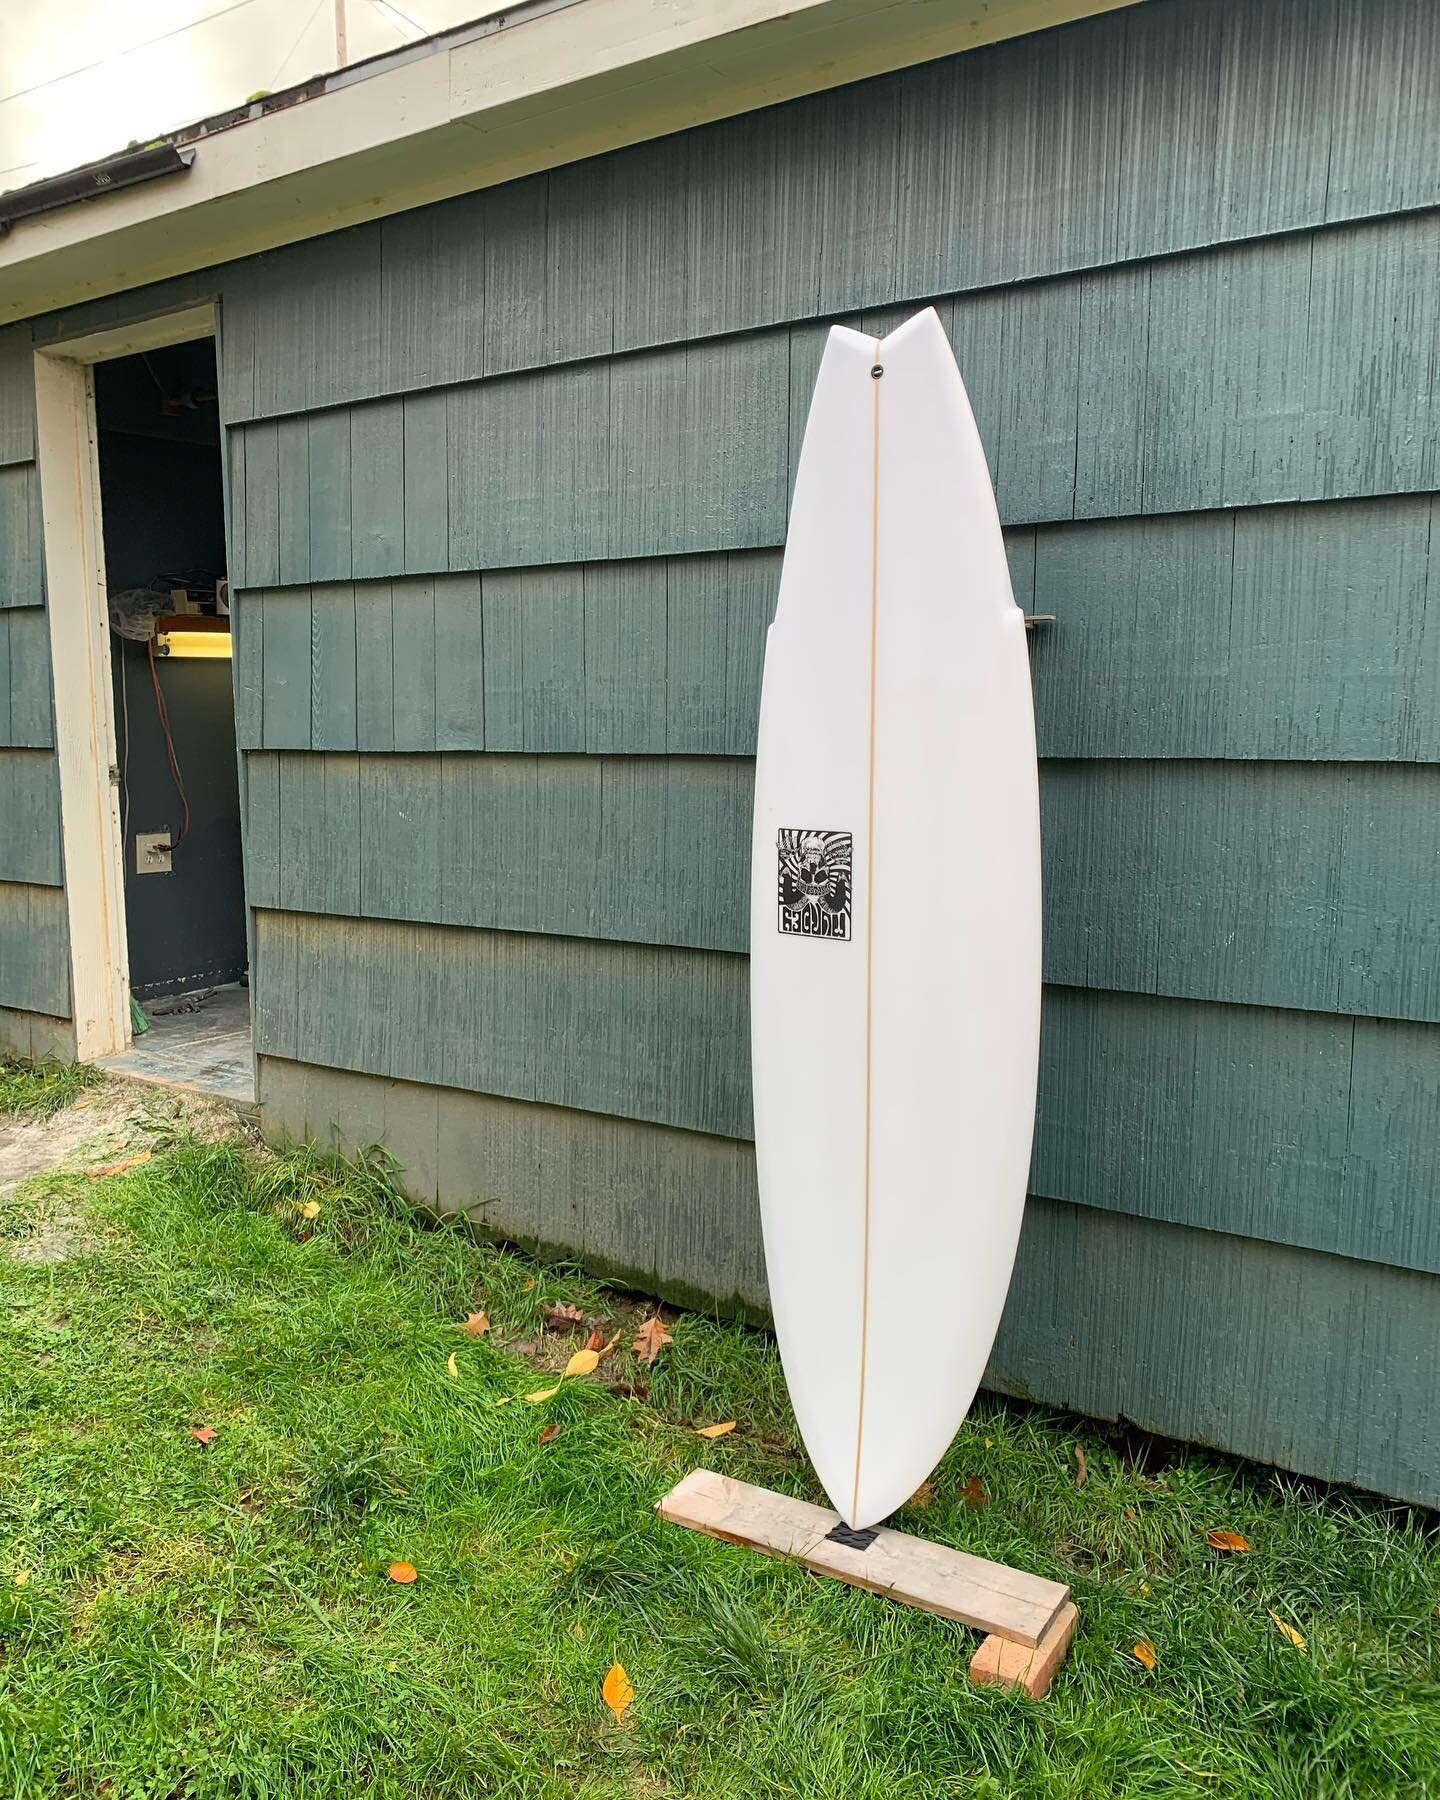 6&rsquo;4&rdquo; x 20 3/4&rdquo; x 2 3/4&rdquo; custom wing swallow for Damon with a cool back story: 
He brought in a older 6&rsquo;8&rdquo; winged bat tail from legendary shaper Robbie Dick that he liked but wanted to go a bit smaller but with the 